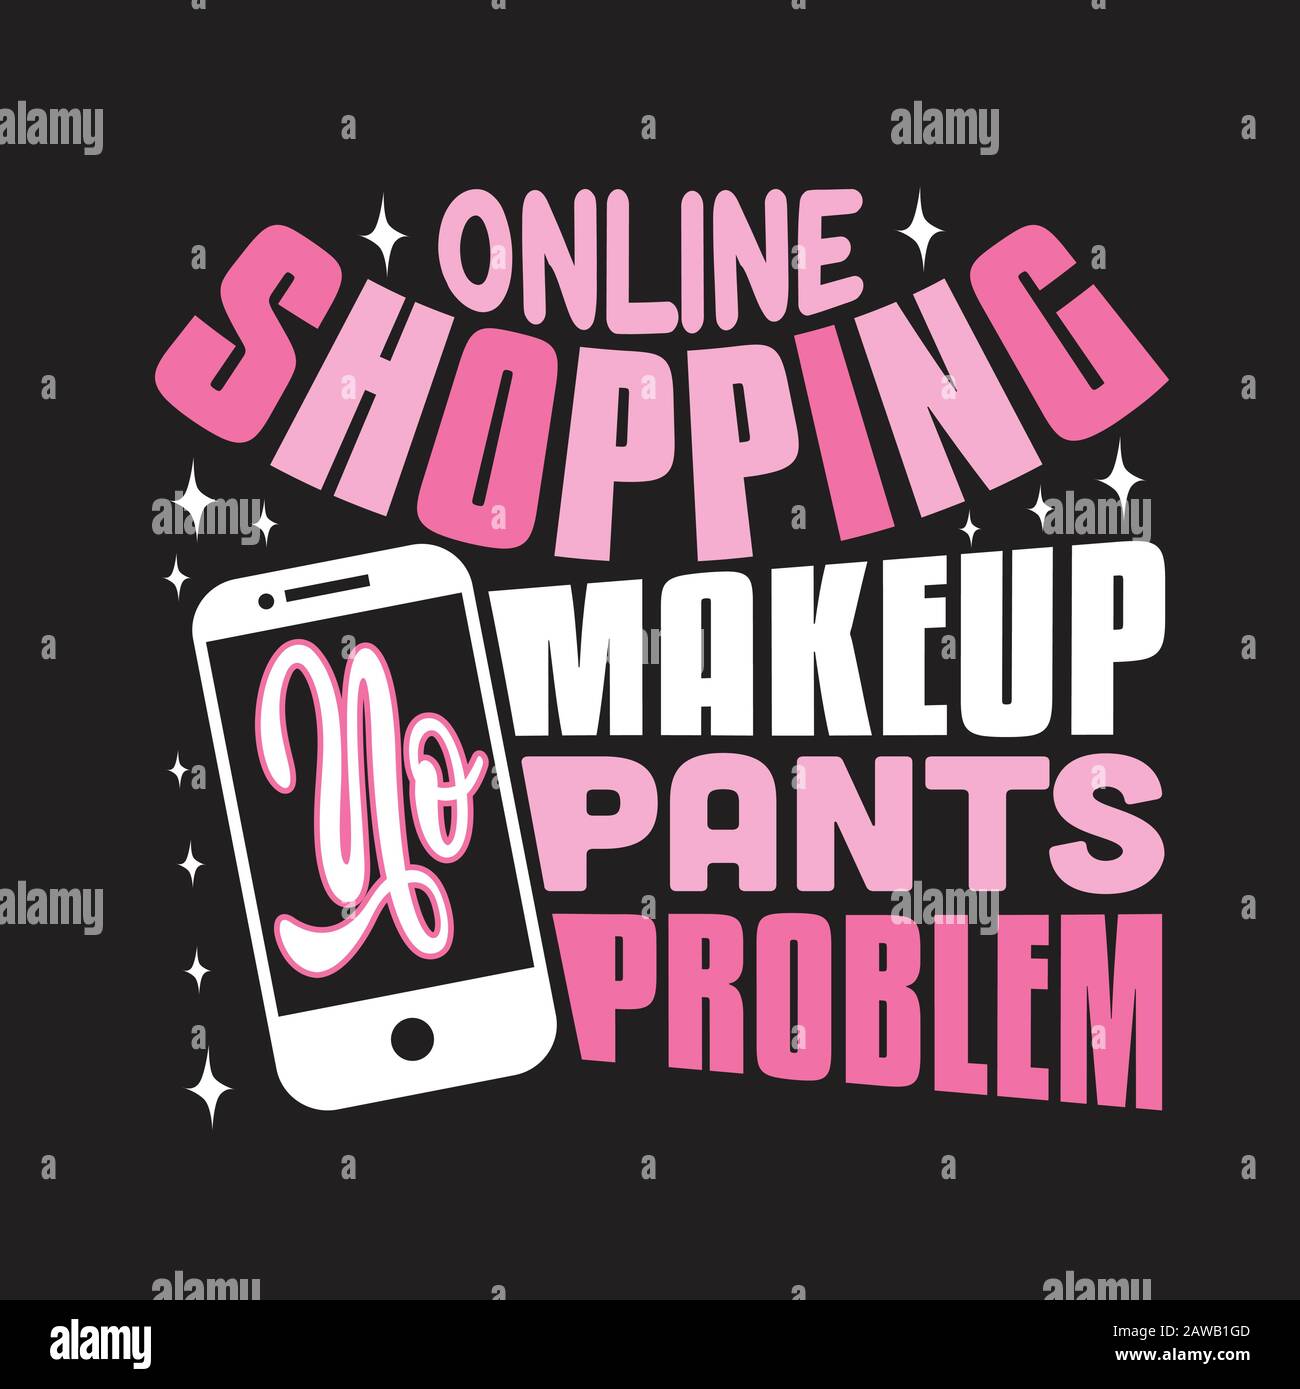 Shopping Quotes And Slogan Good For Tee Online Shopping No Makeup No Pants No Problem 2AWB1GD 